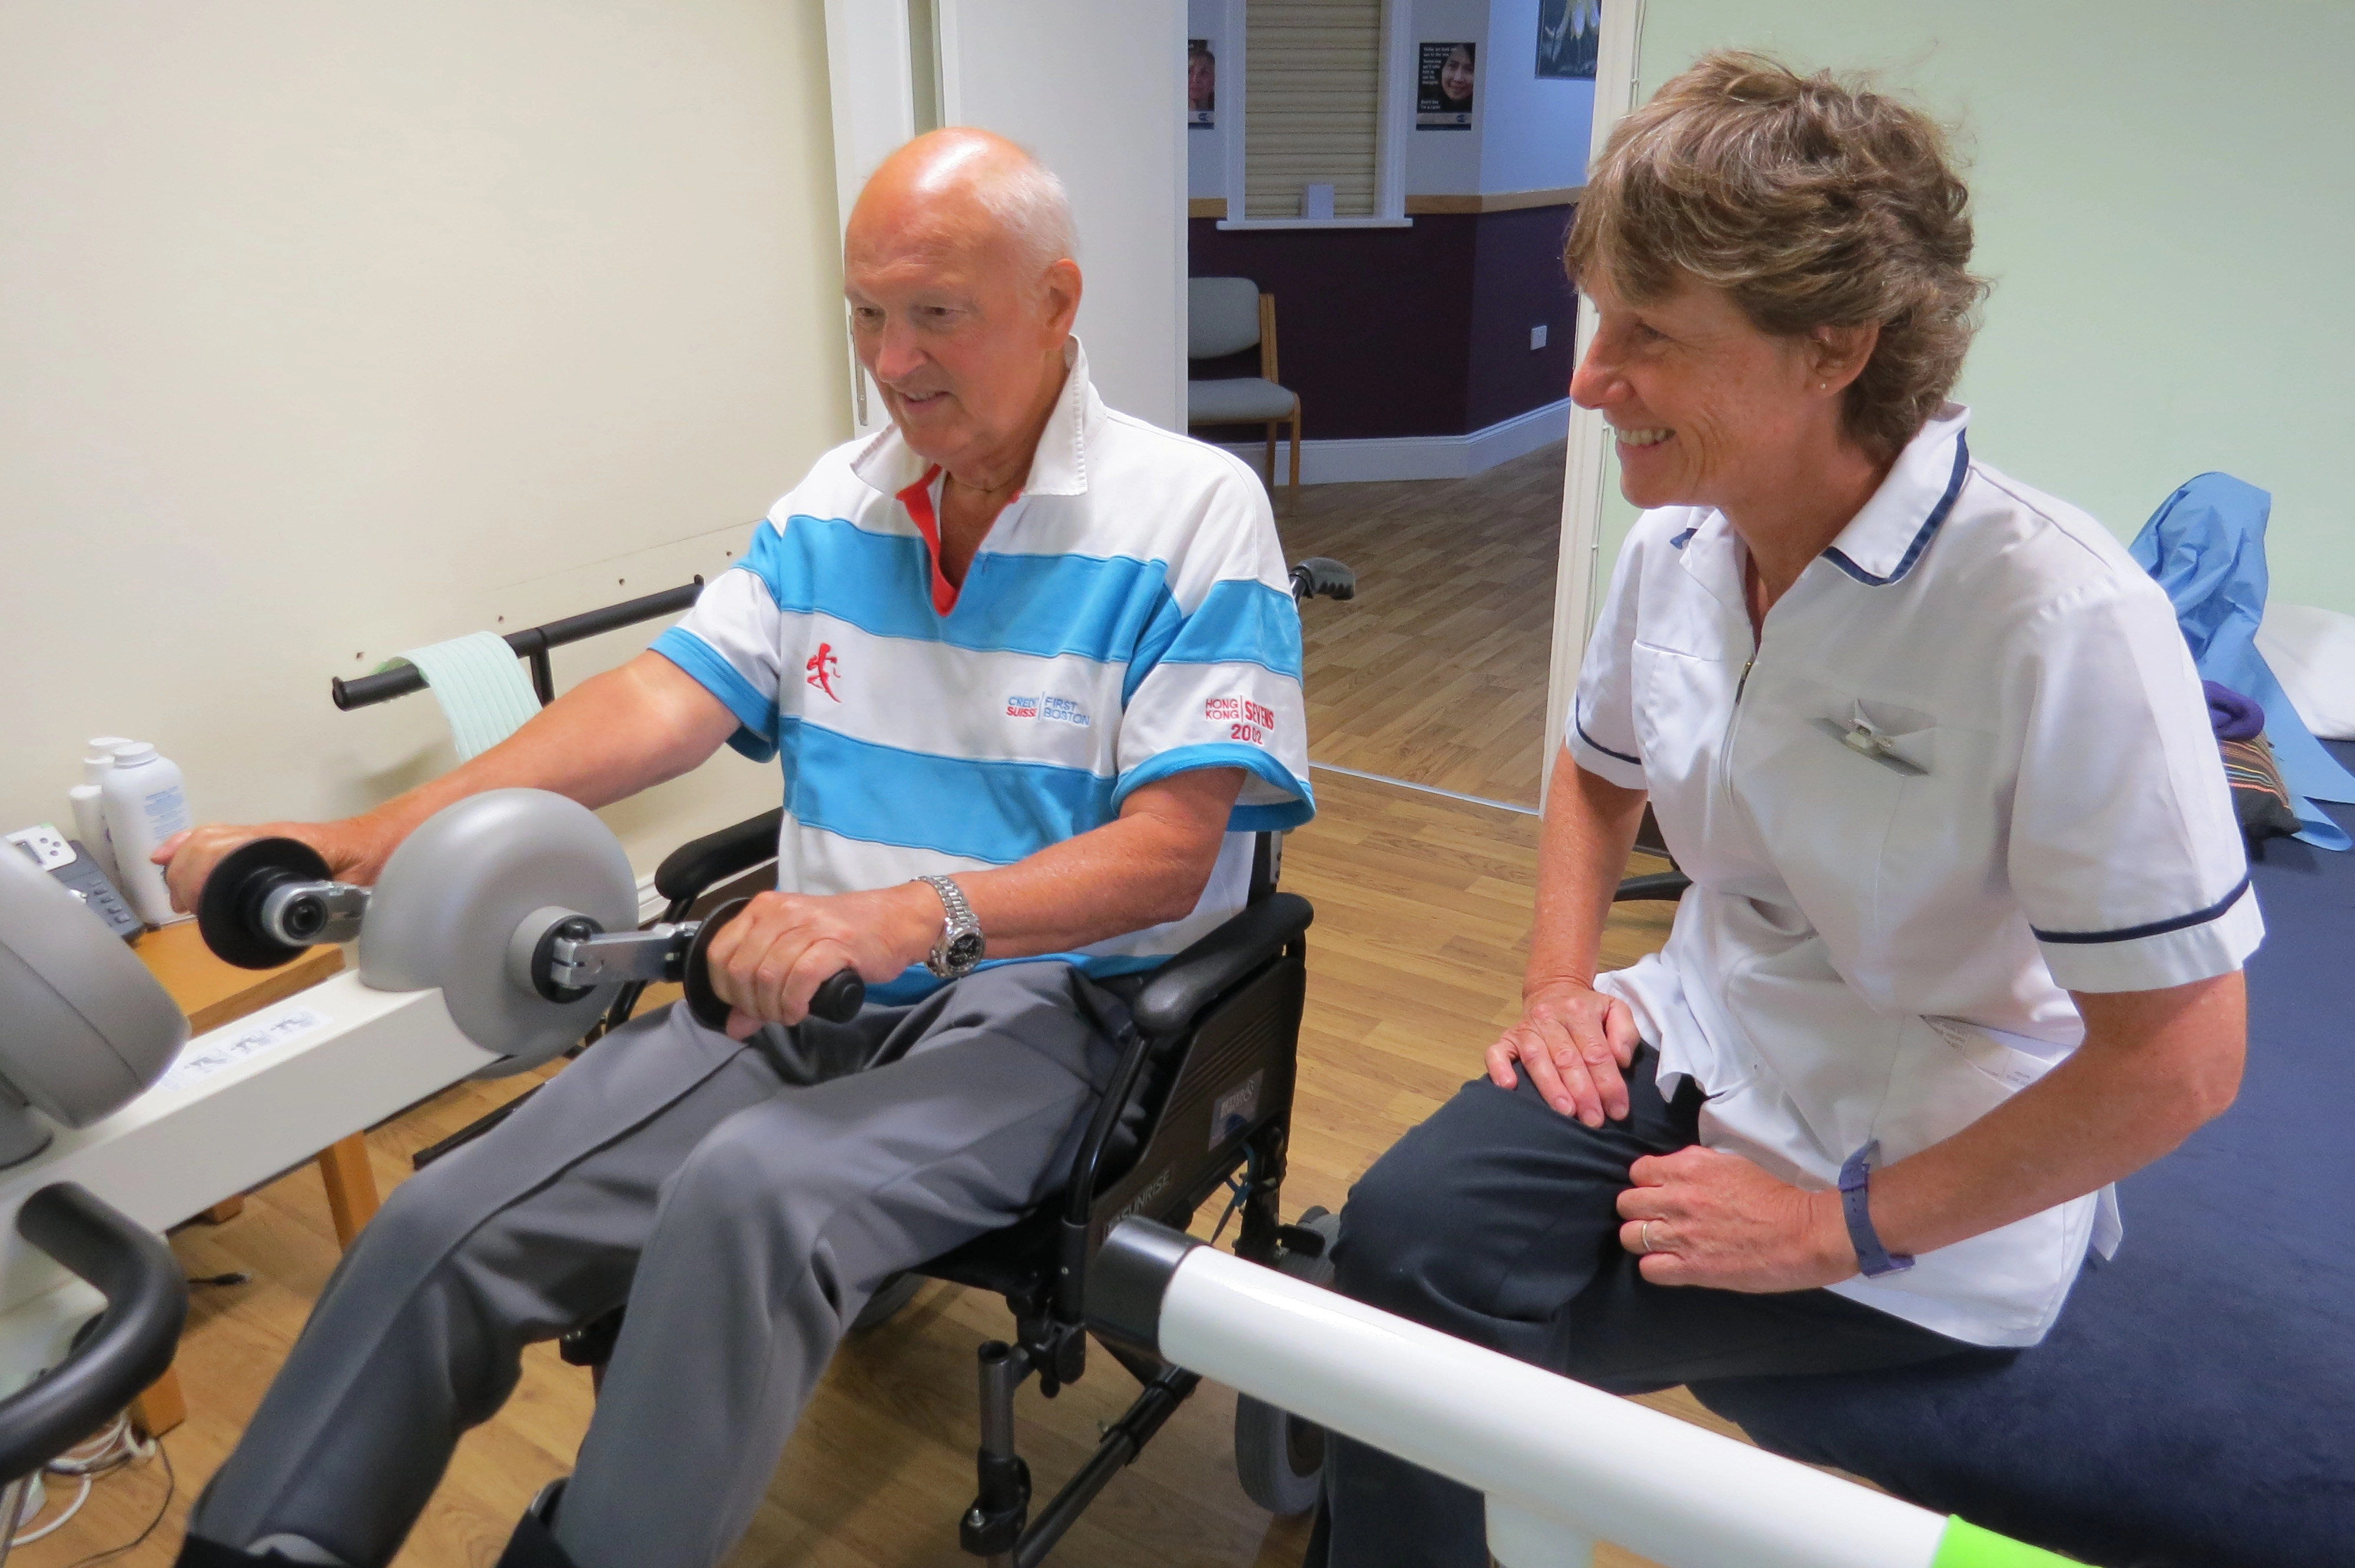 Patient using a hand bike for physiotherpy